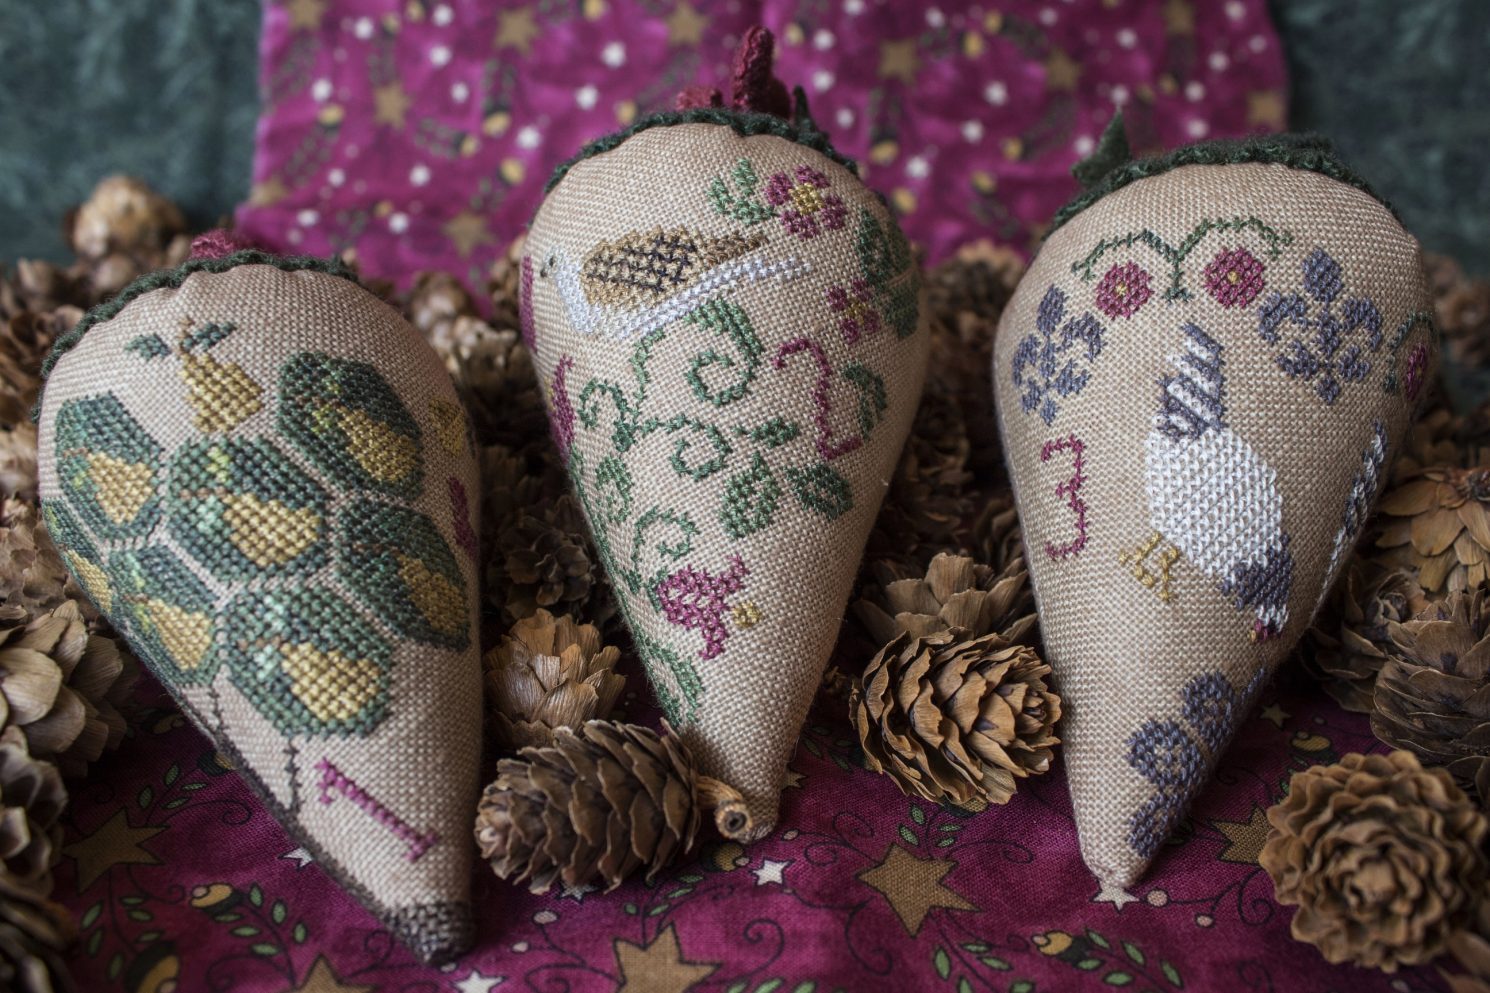 Part 1 -  The Partridge, Turtle Doves and French Hens.The 12 Days of Christmas  by Erica Michaels Needlework Designs